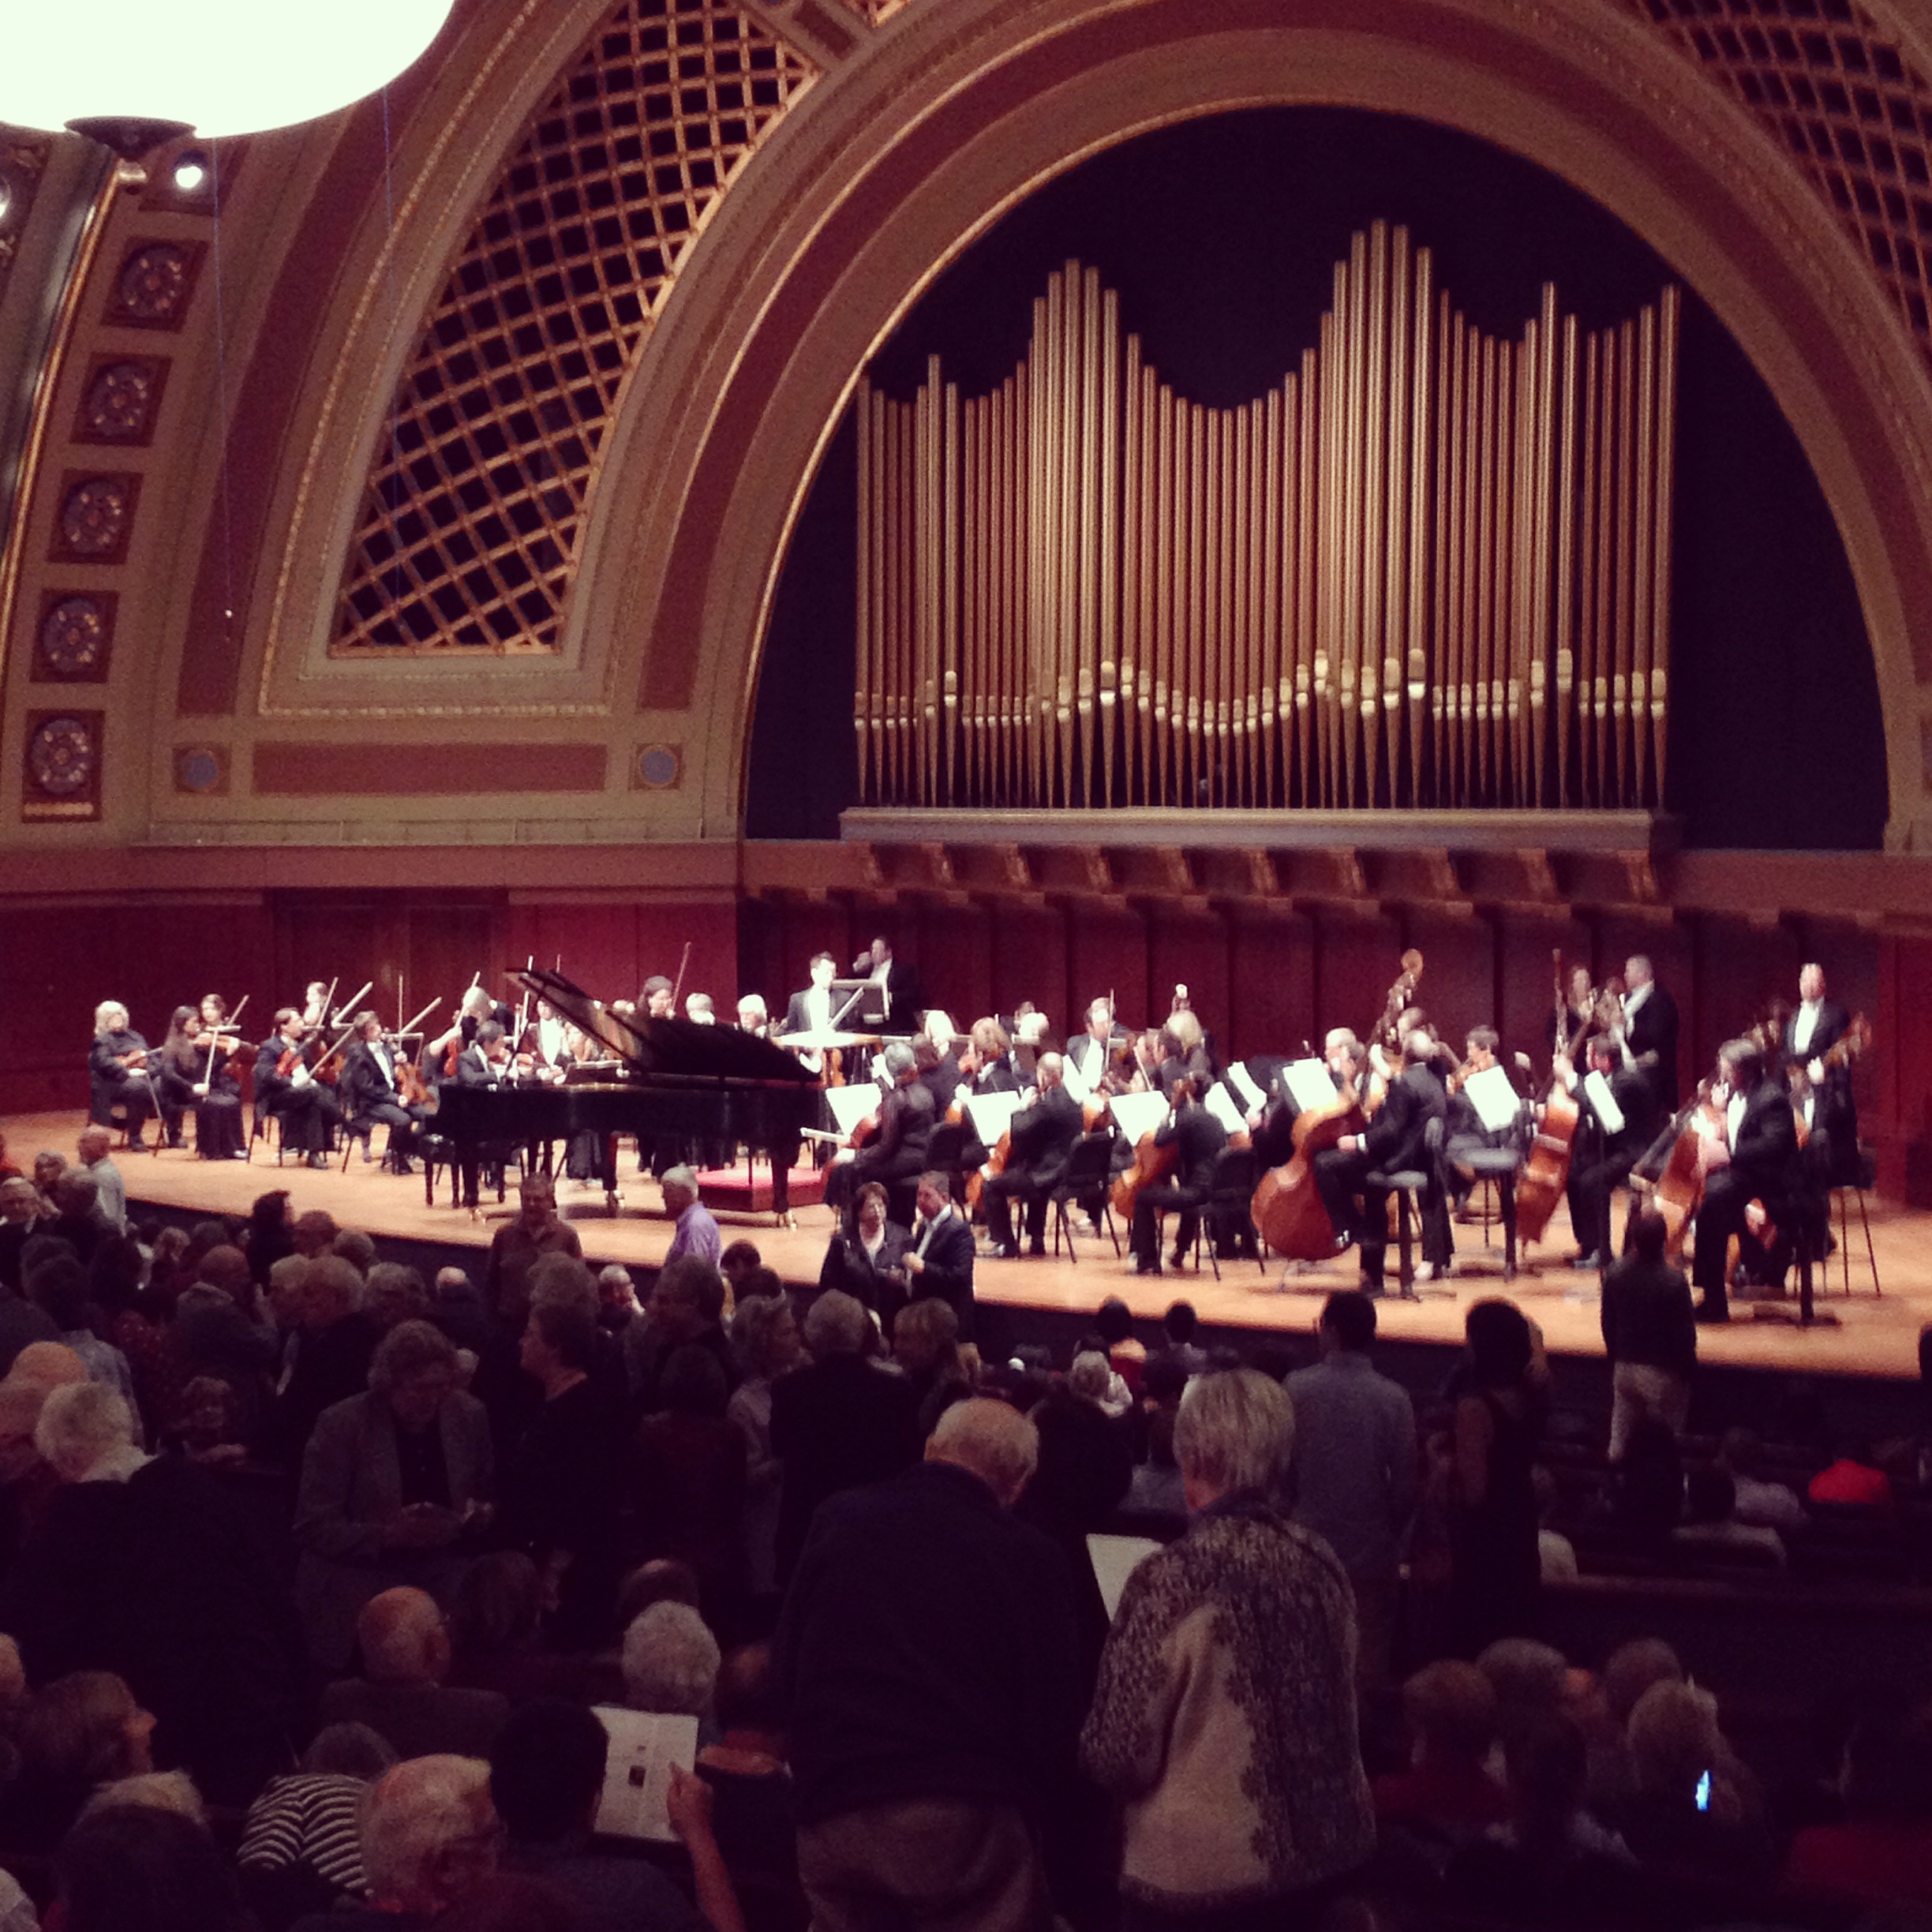 Piano Concerto in G by Ravel, performed by Helene Grimaud, at the Hill Auditorium, Ann Arbor